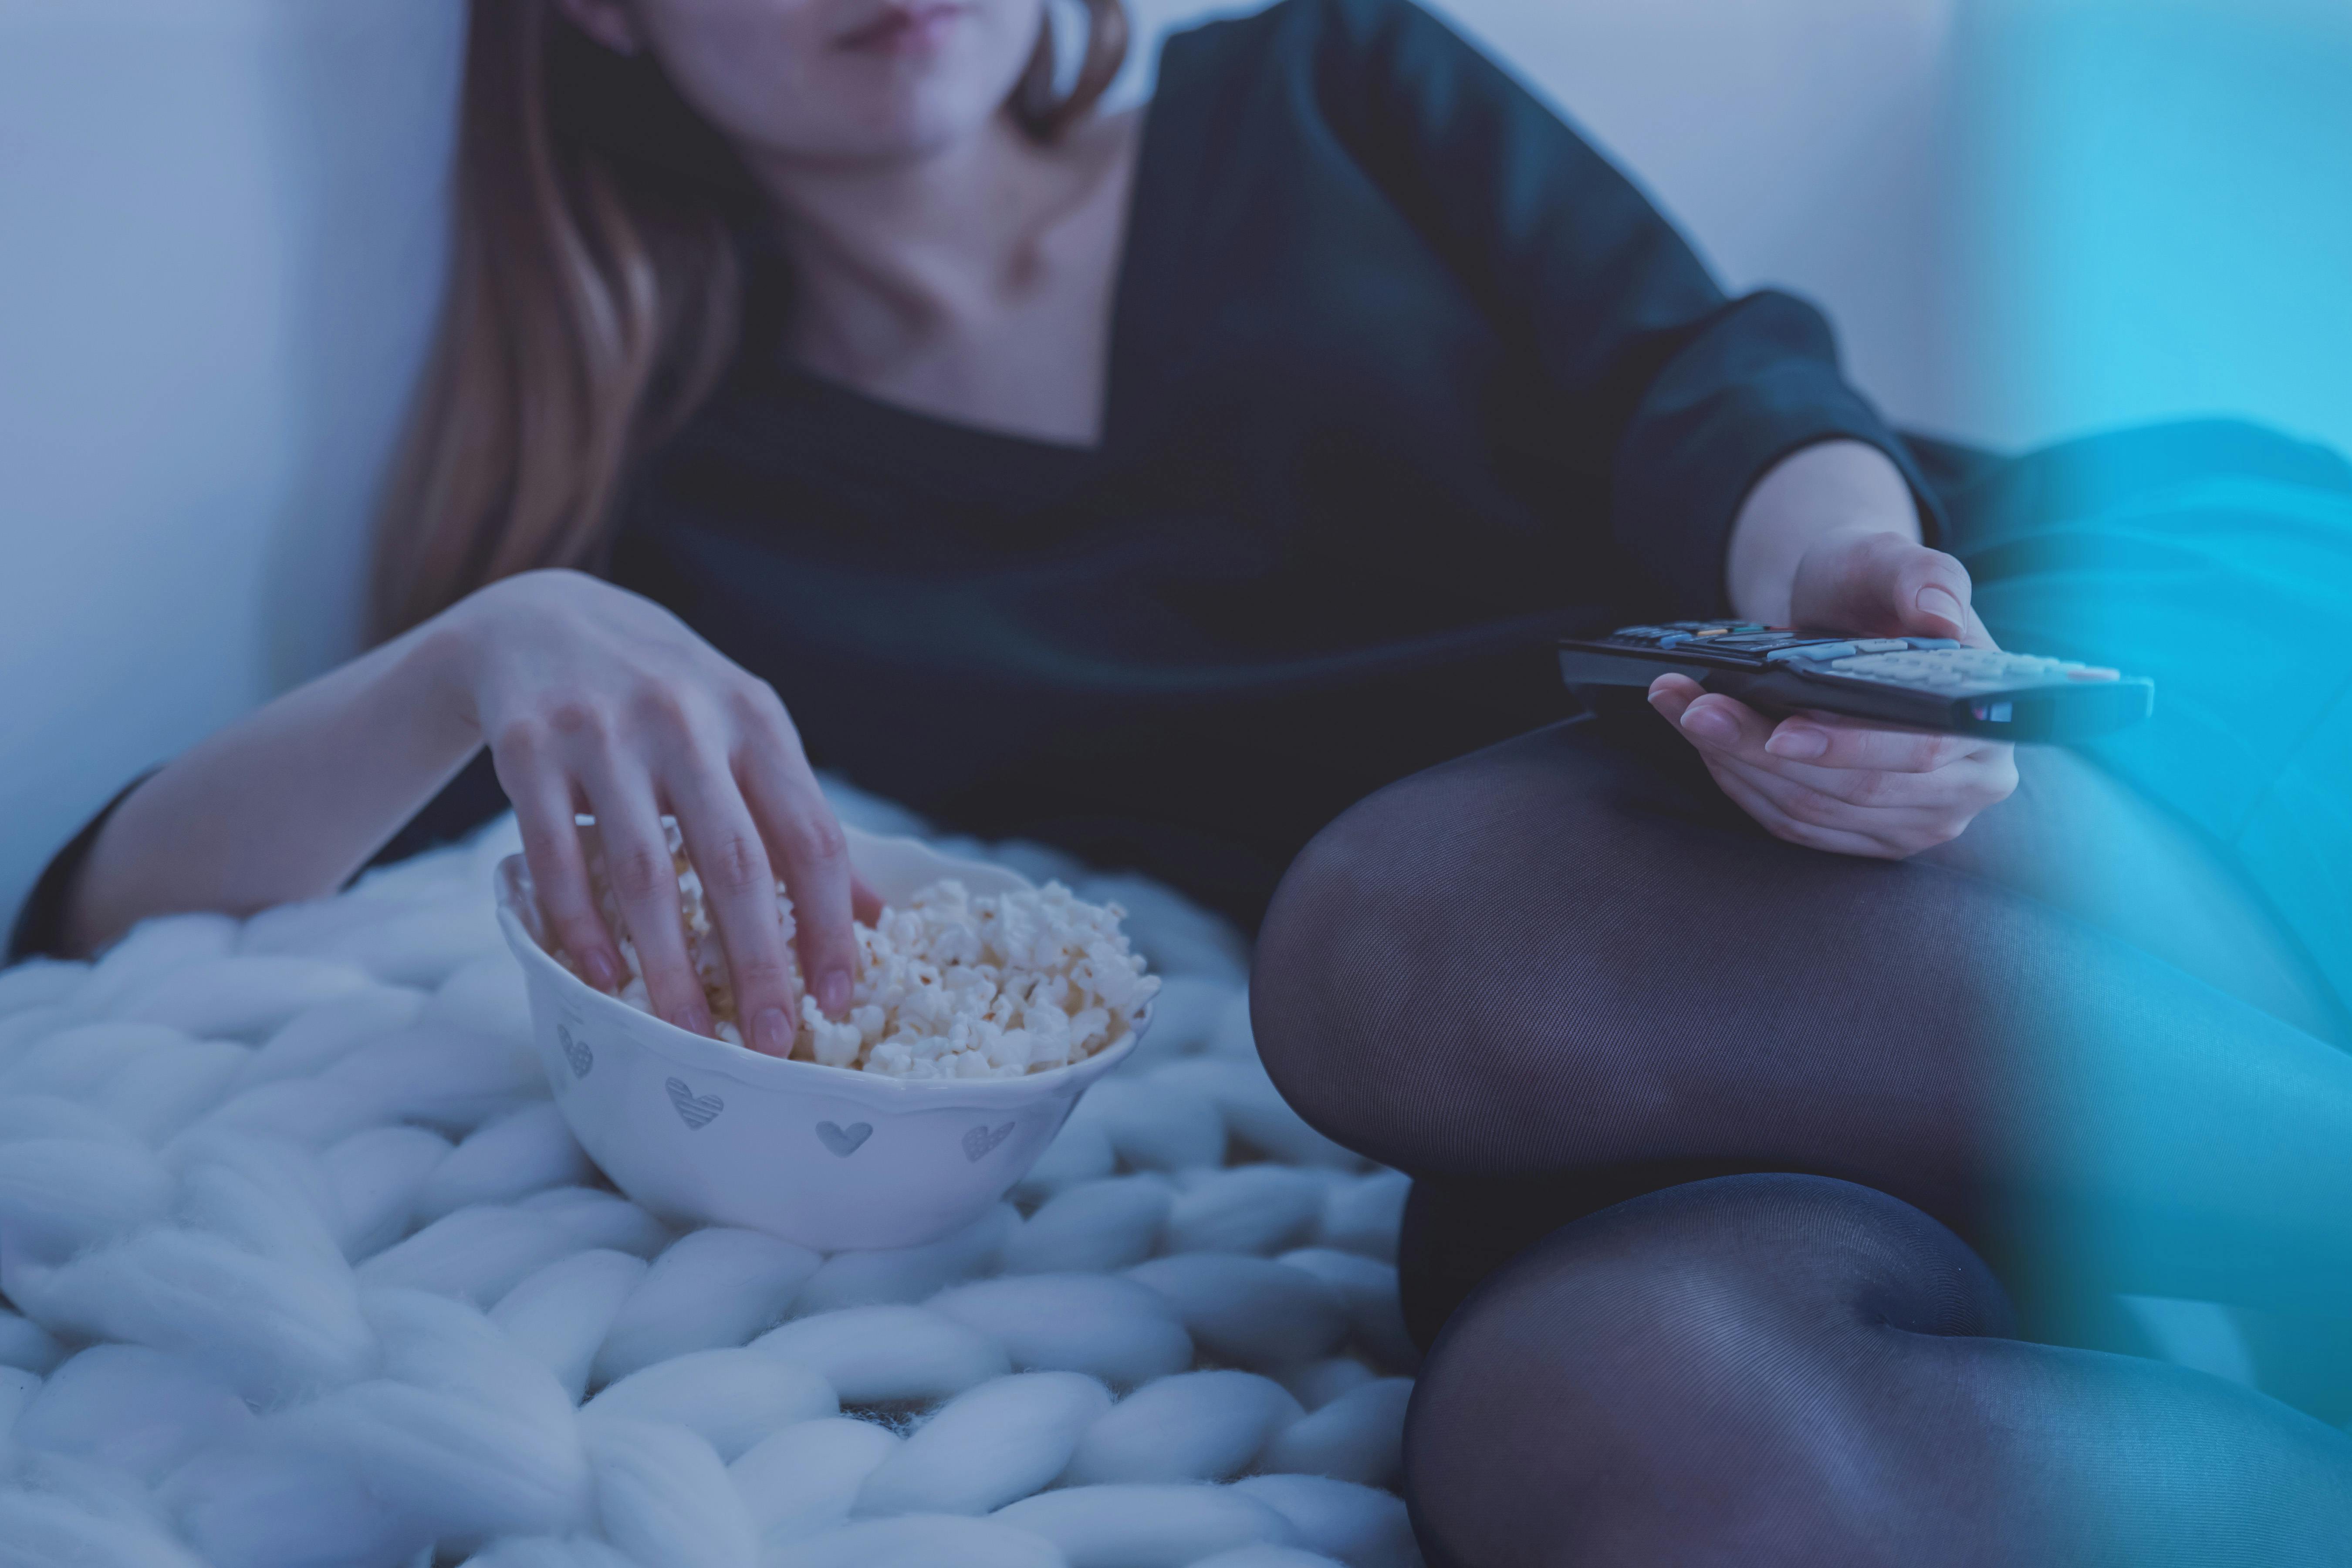 A woman watching TV | Source: Pexels